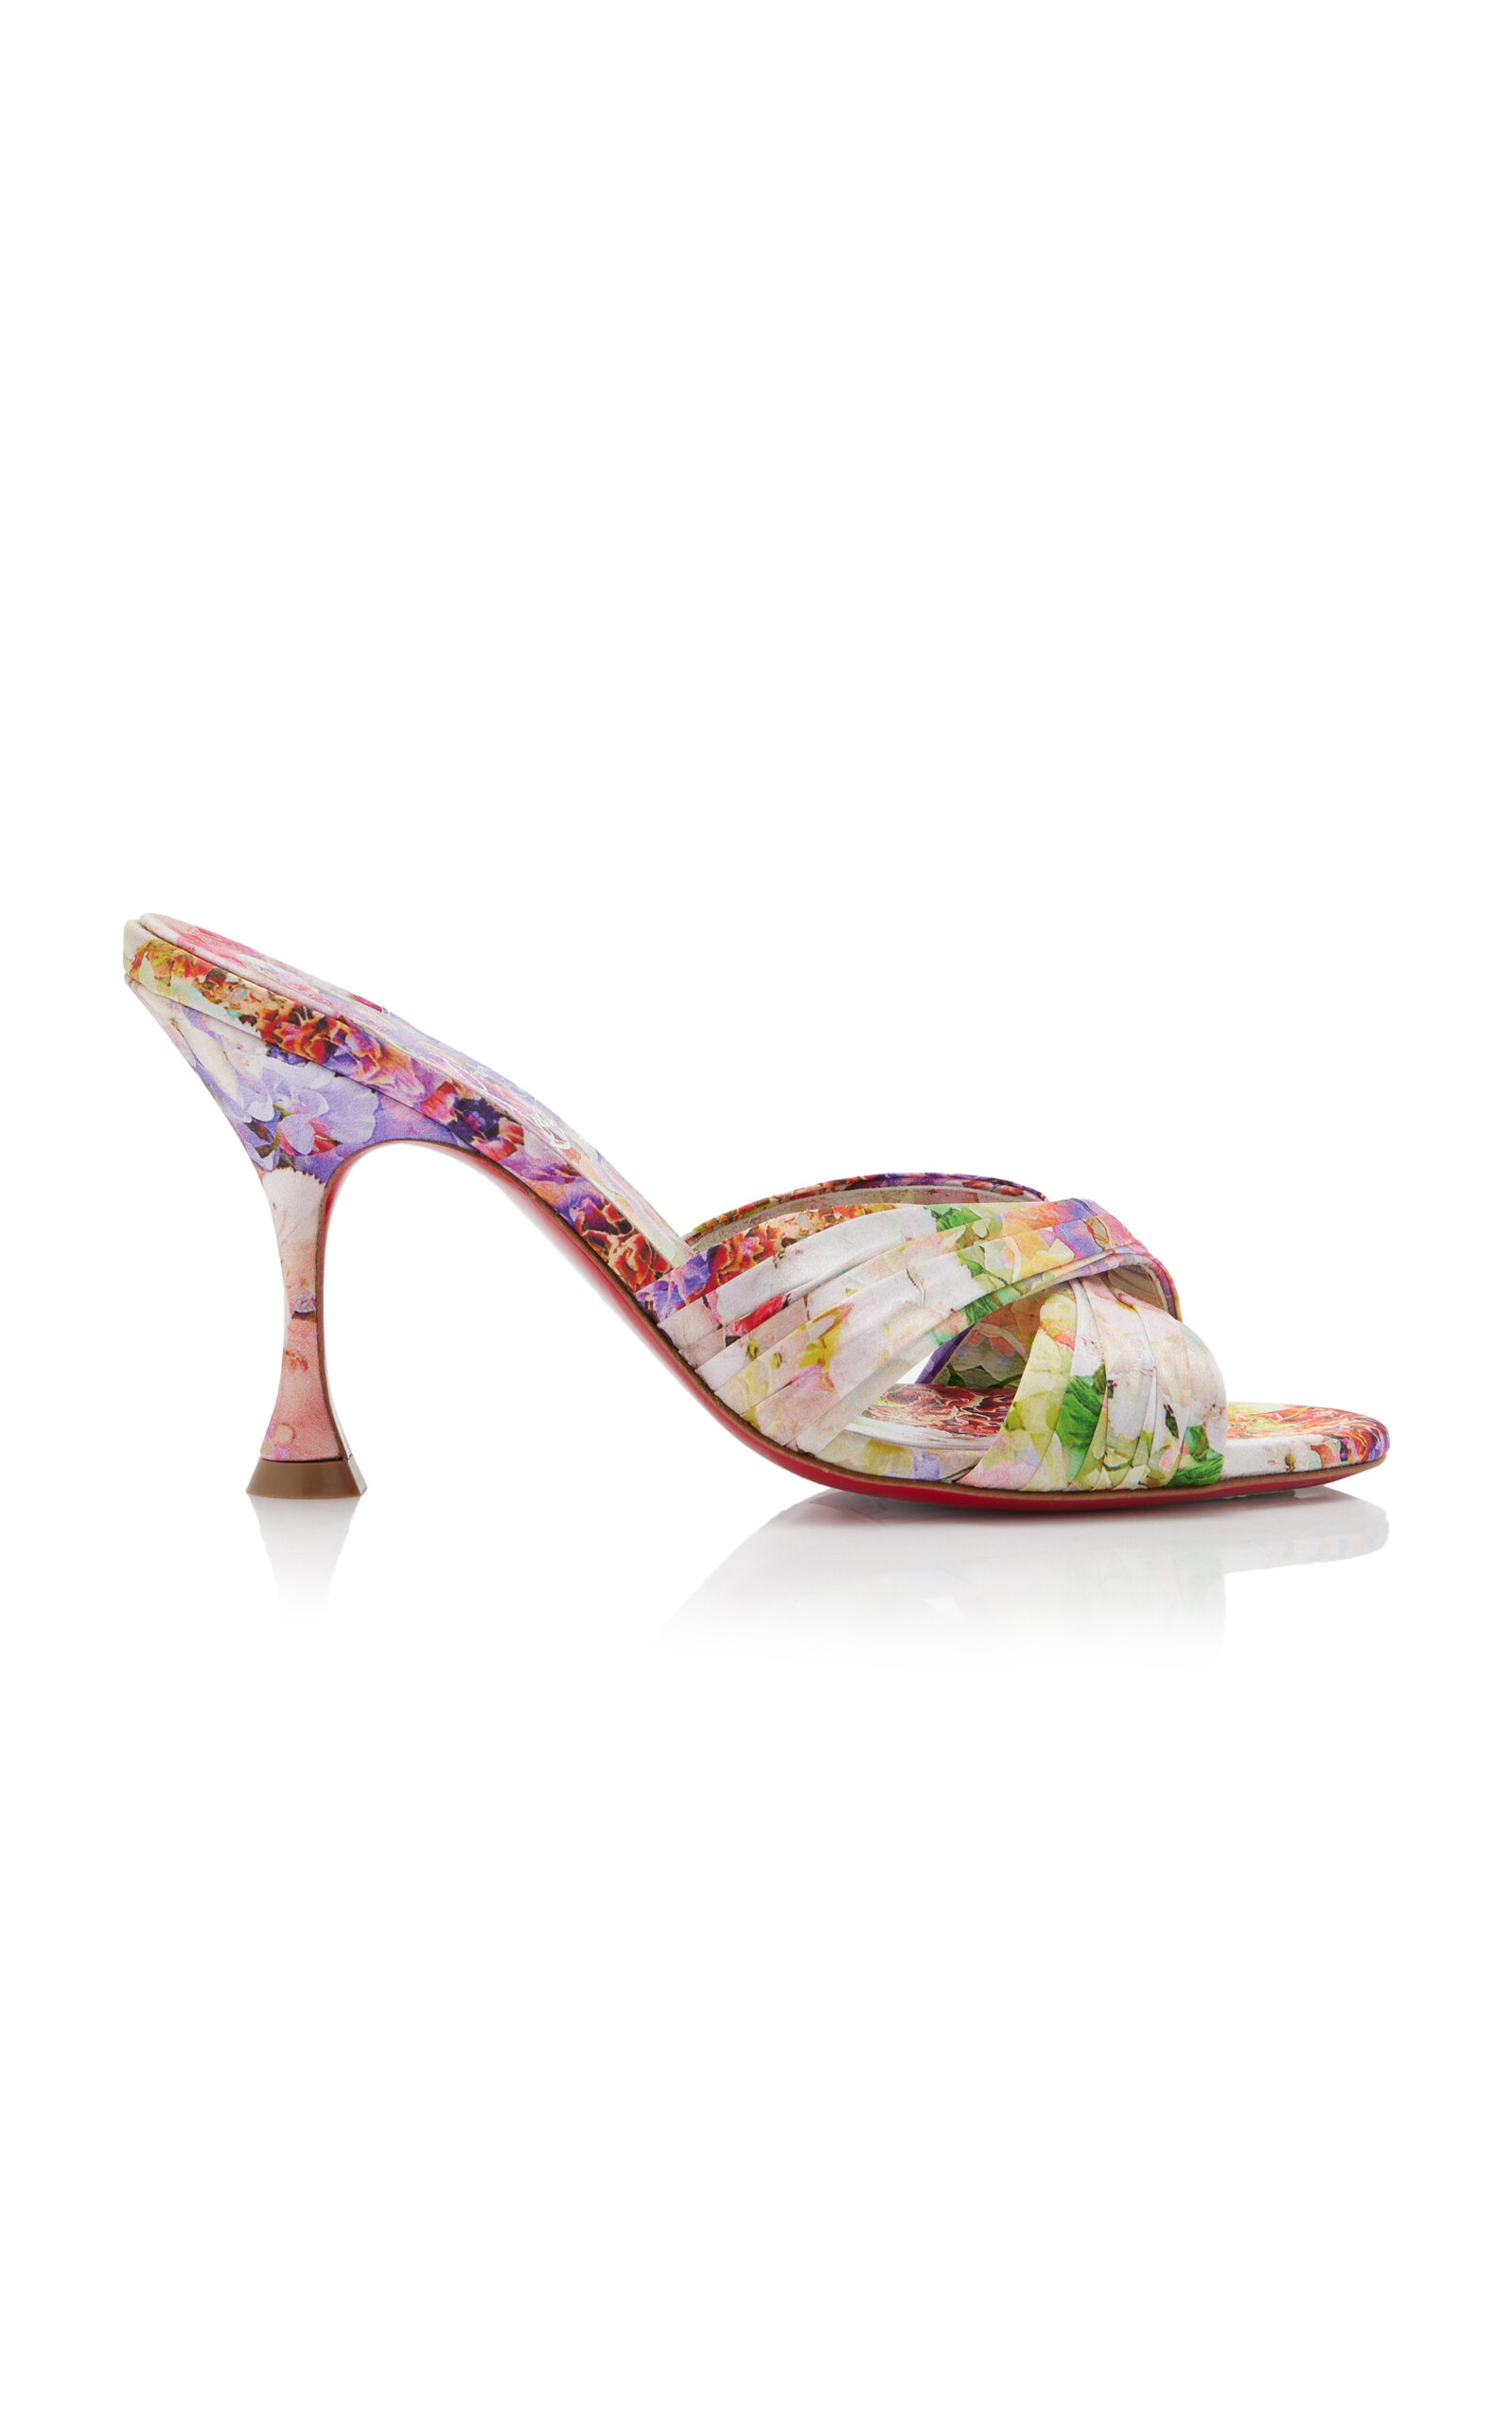 Christian Louboutin Nicol Is Back 85mm Crepe Satin Sandals In Multi